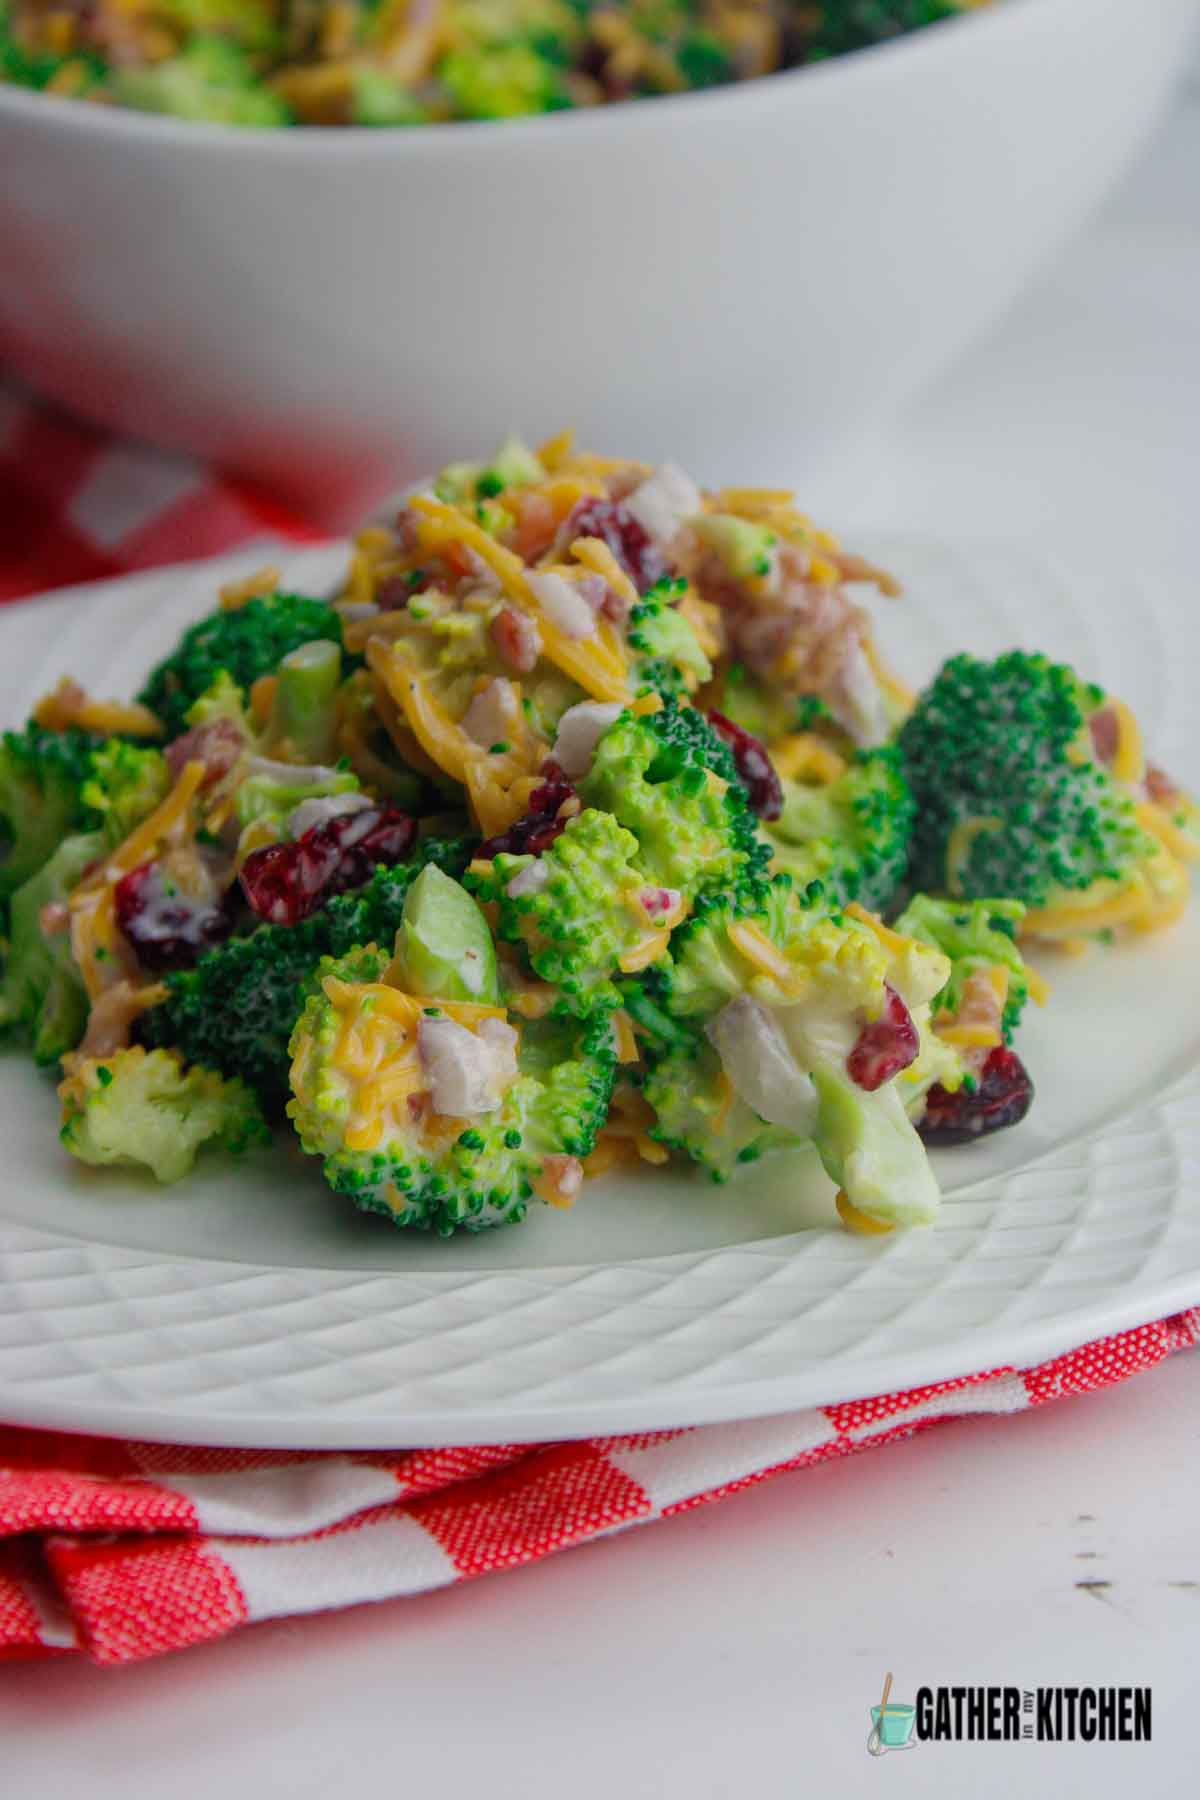 Broccoli salad with bacon and cheese on a plate.